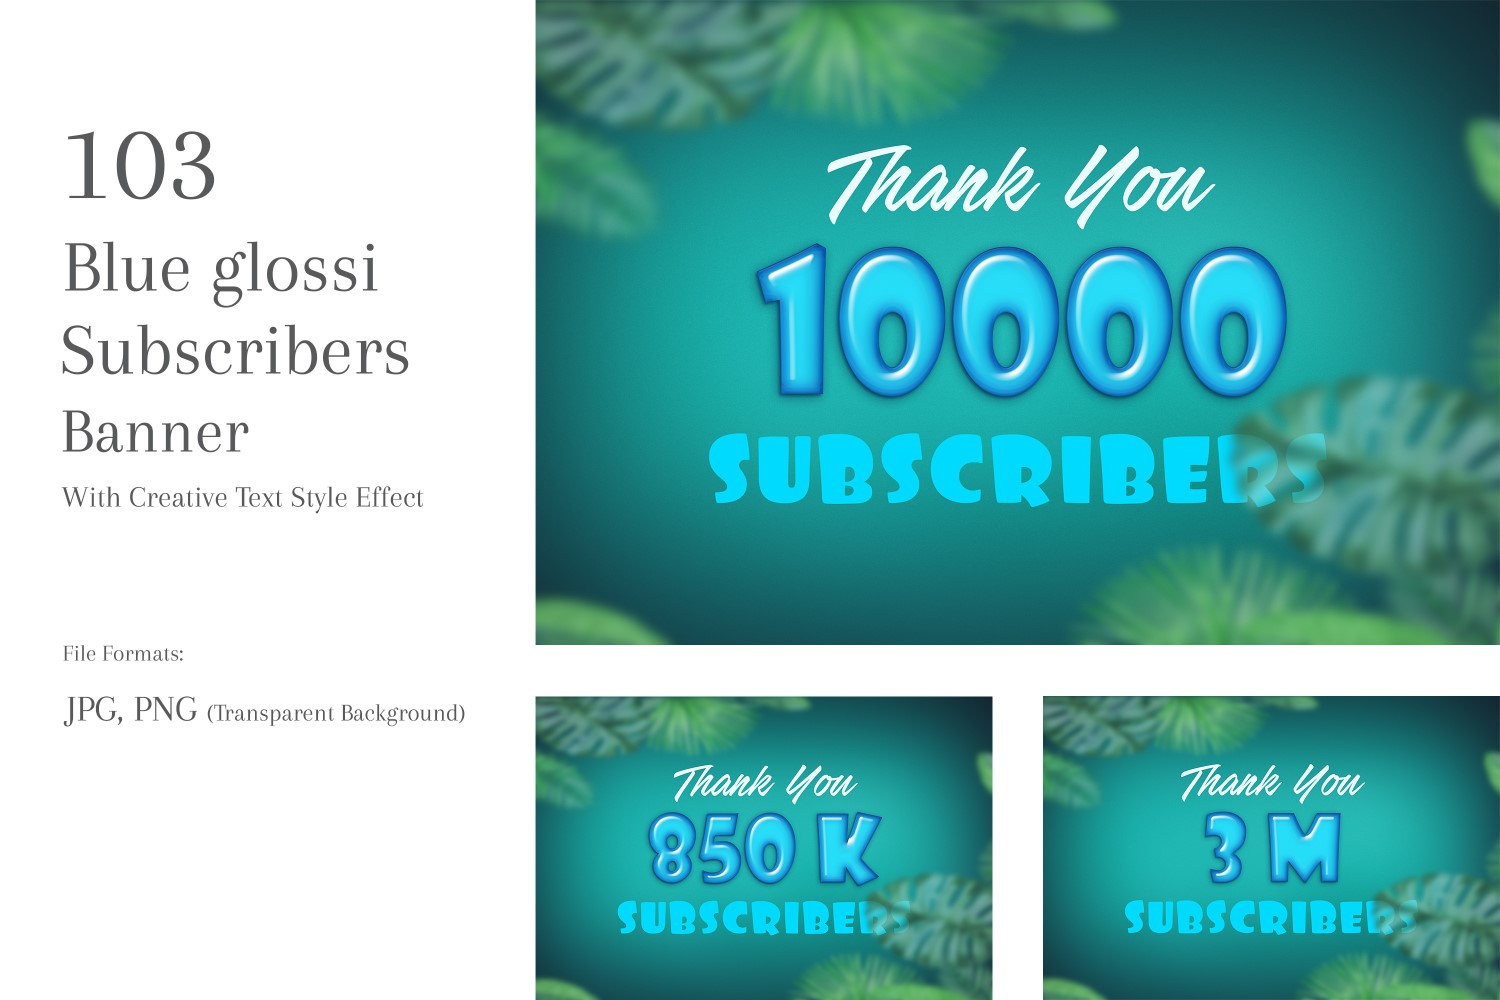 Blue glossi Subscribers Banner  Design Set 64